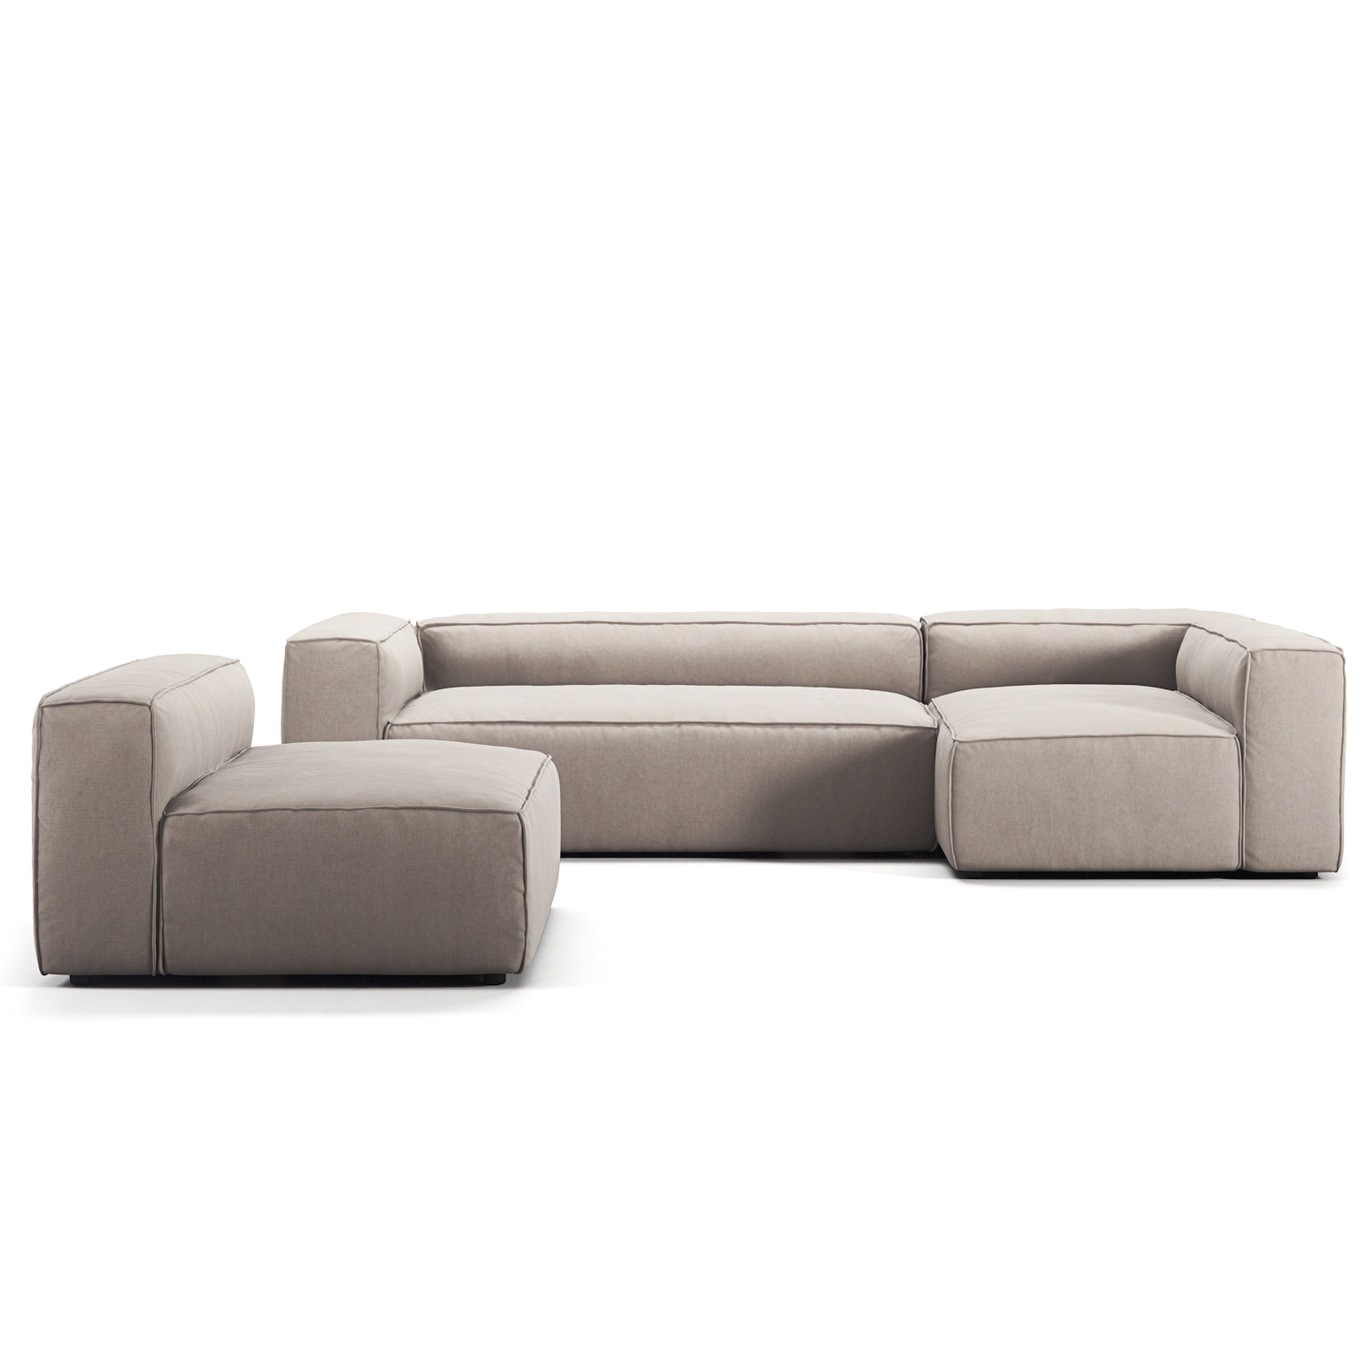 Grand 4 Seater Sofa Divan Right With Armchair, Sandshell Beige